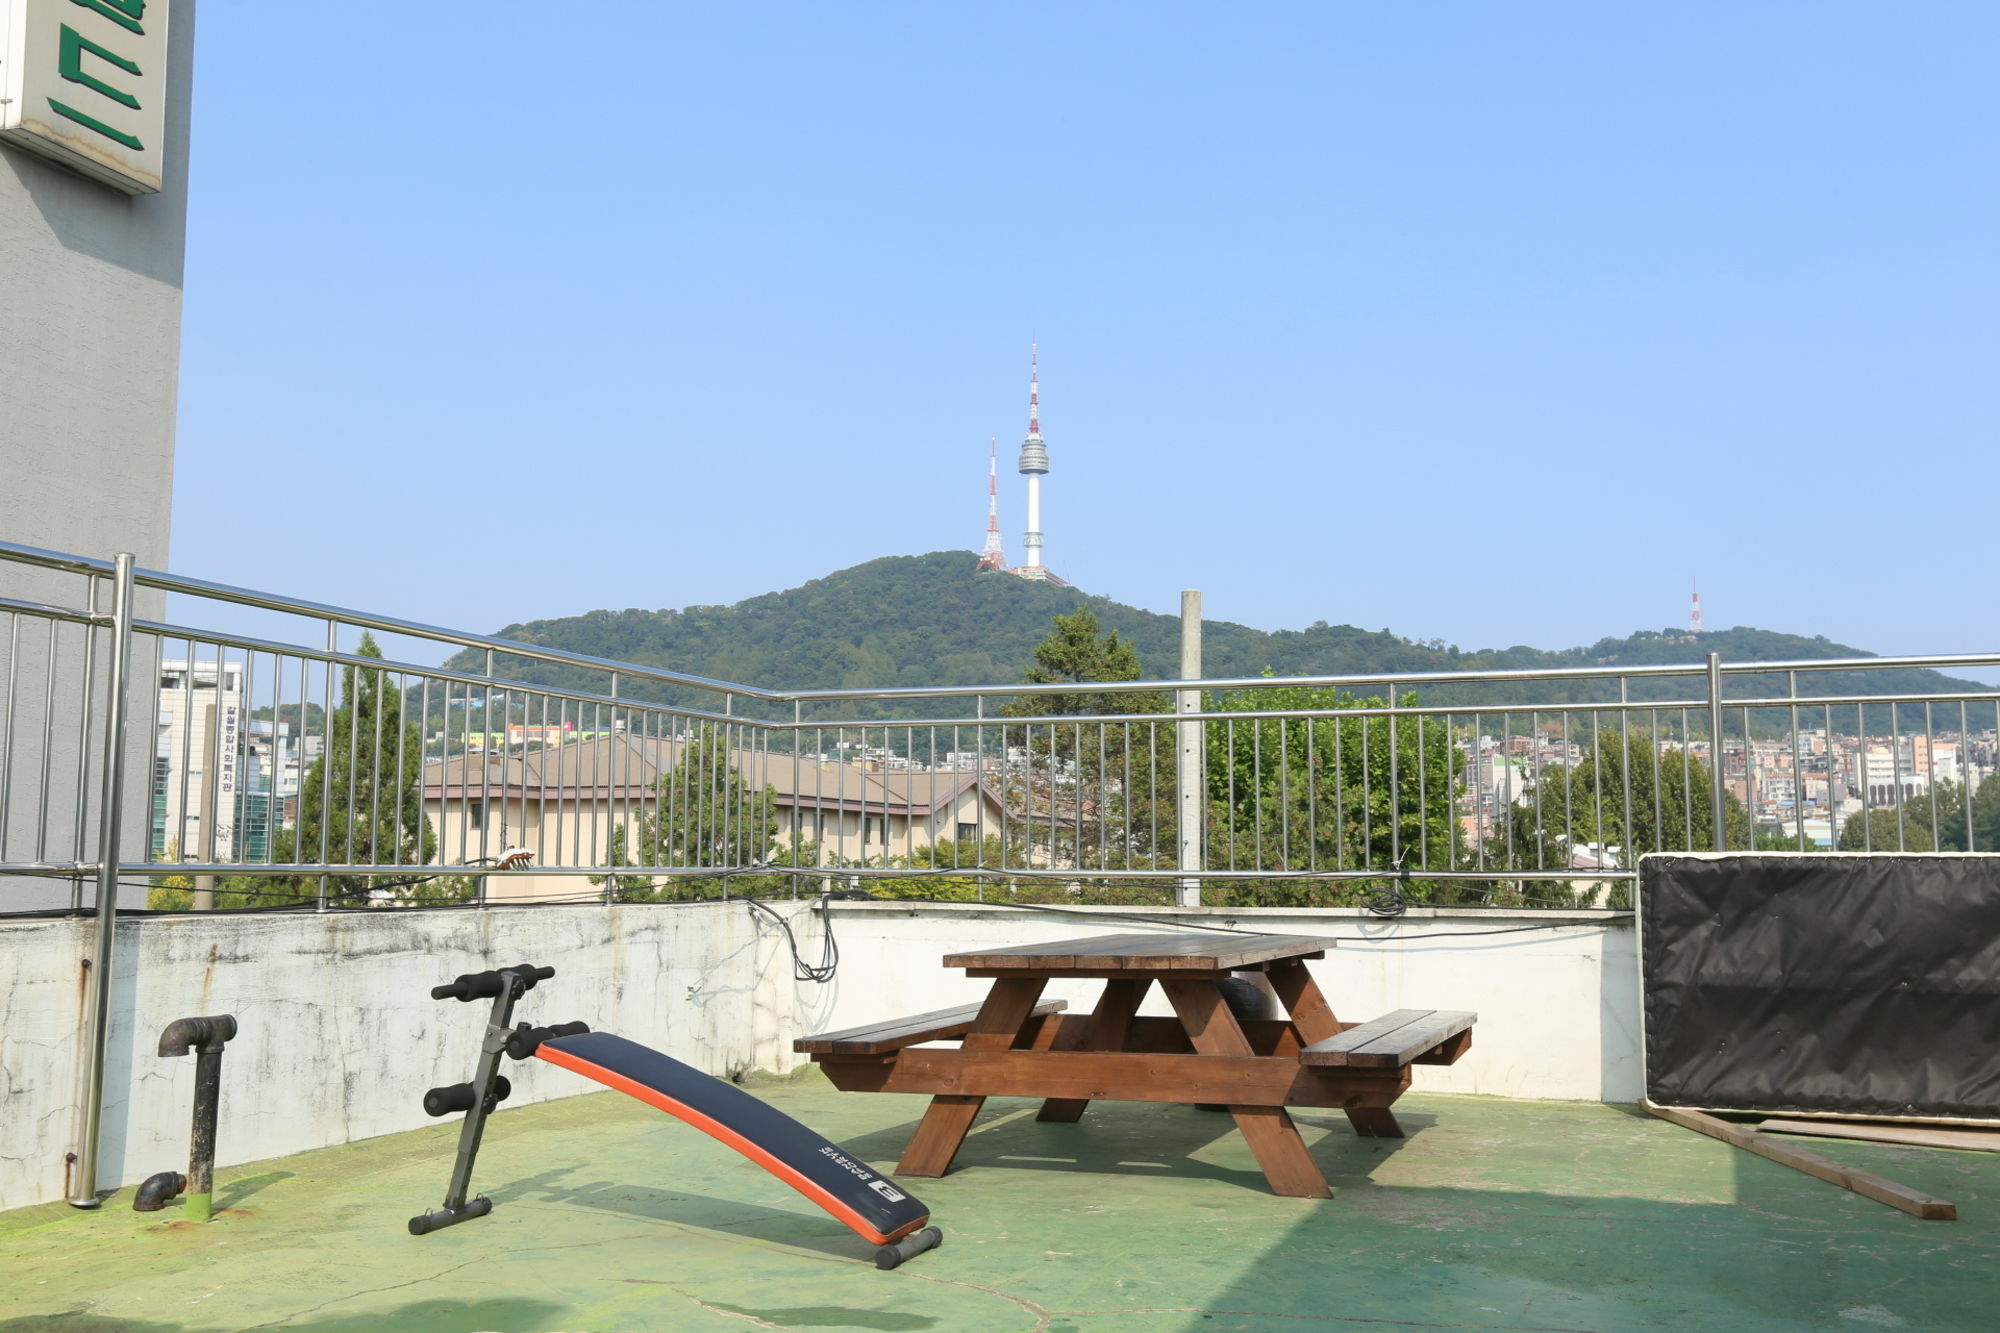 Seoul Tower Family Guesthouse Экстерьер фото